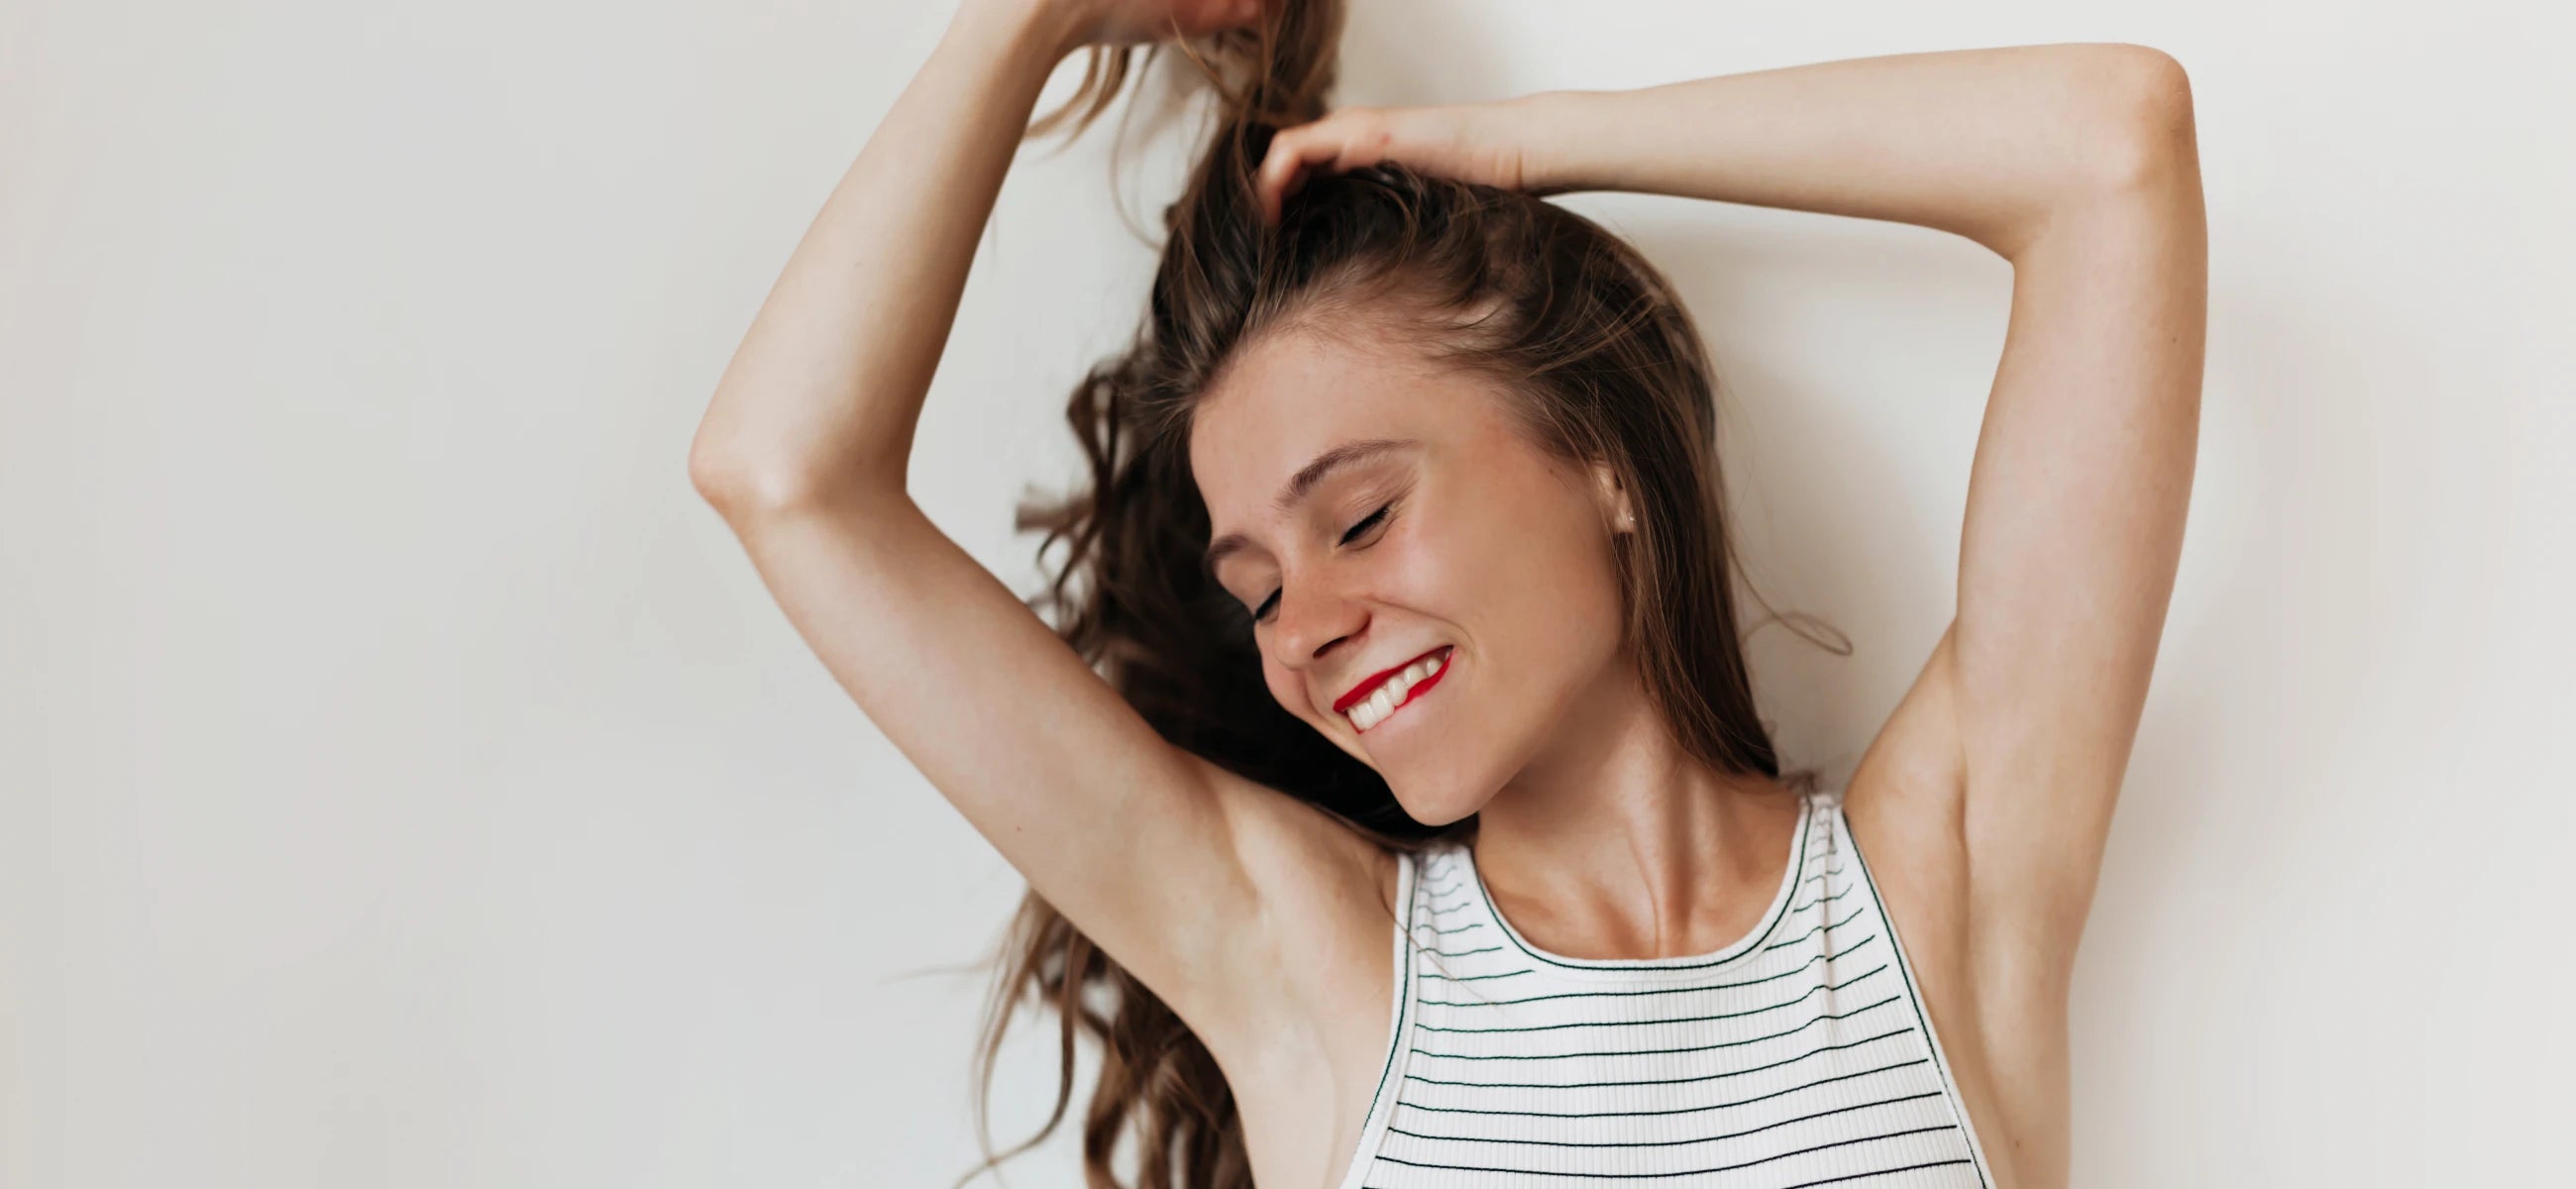 How to air dry hair without frizz and look good: An ultimate guide